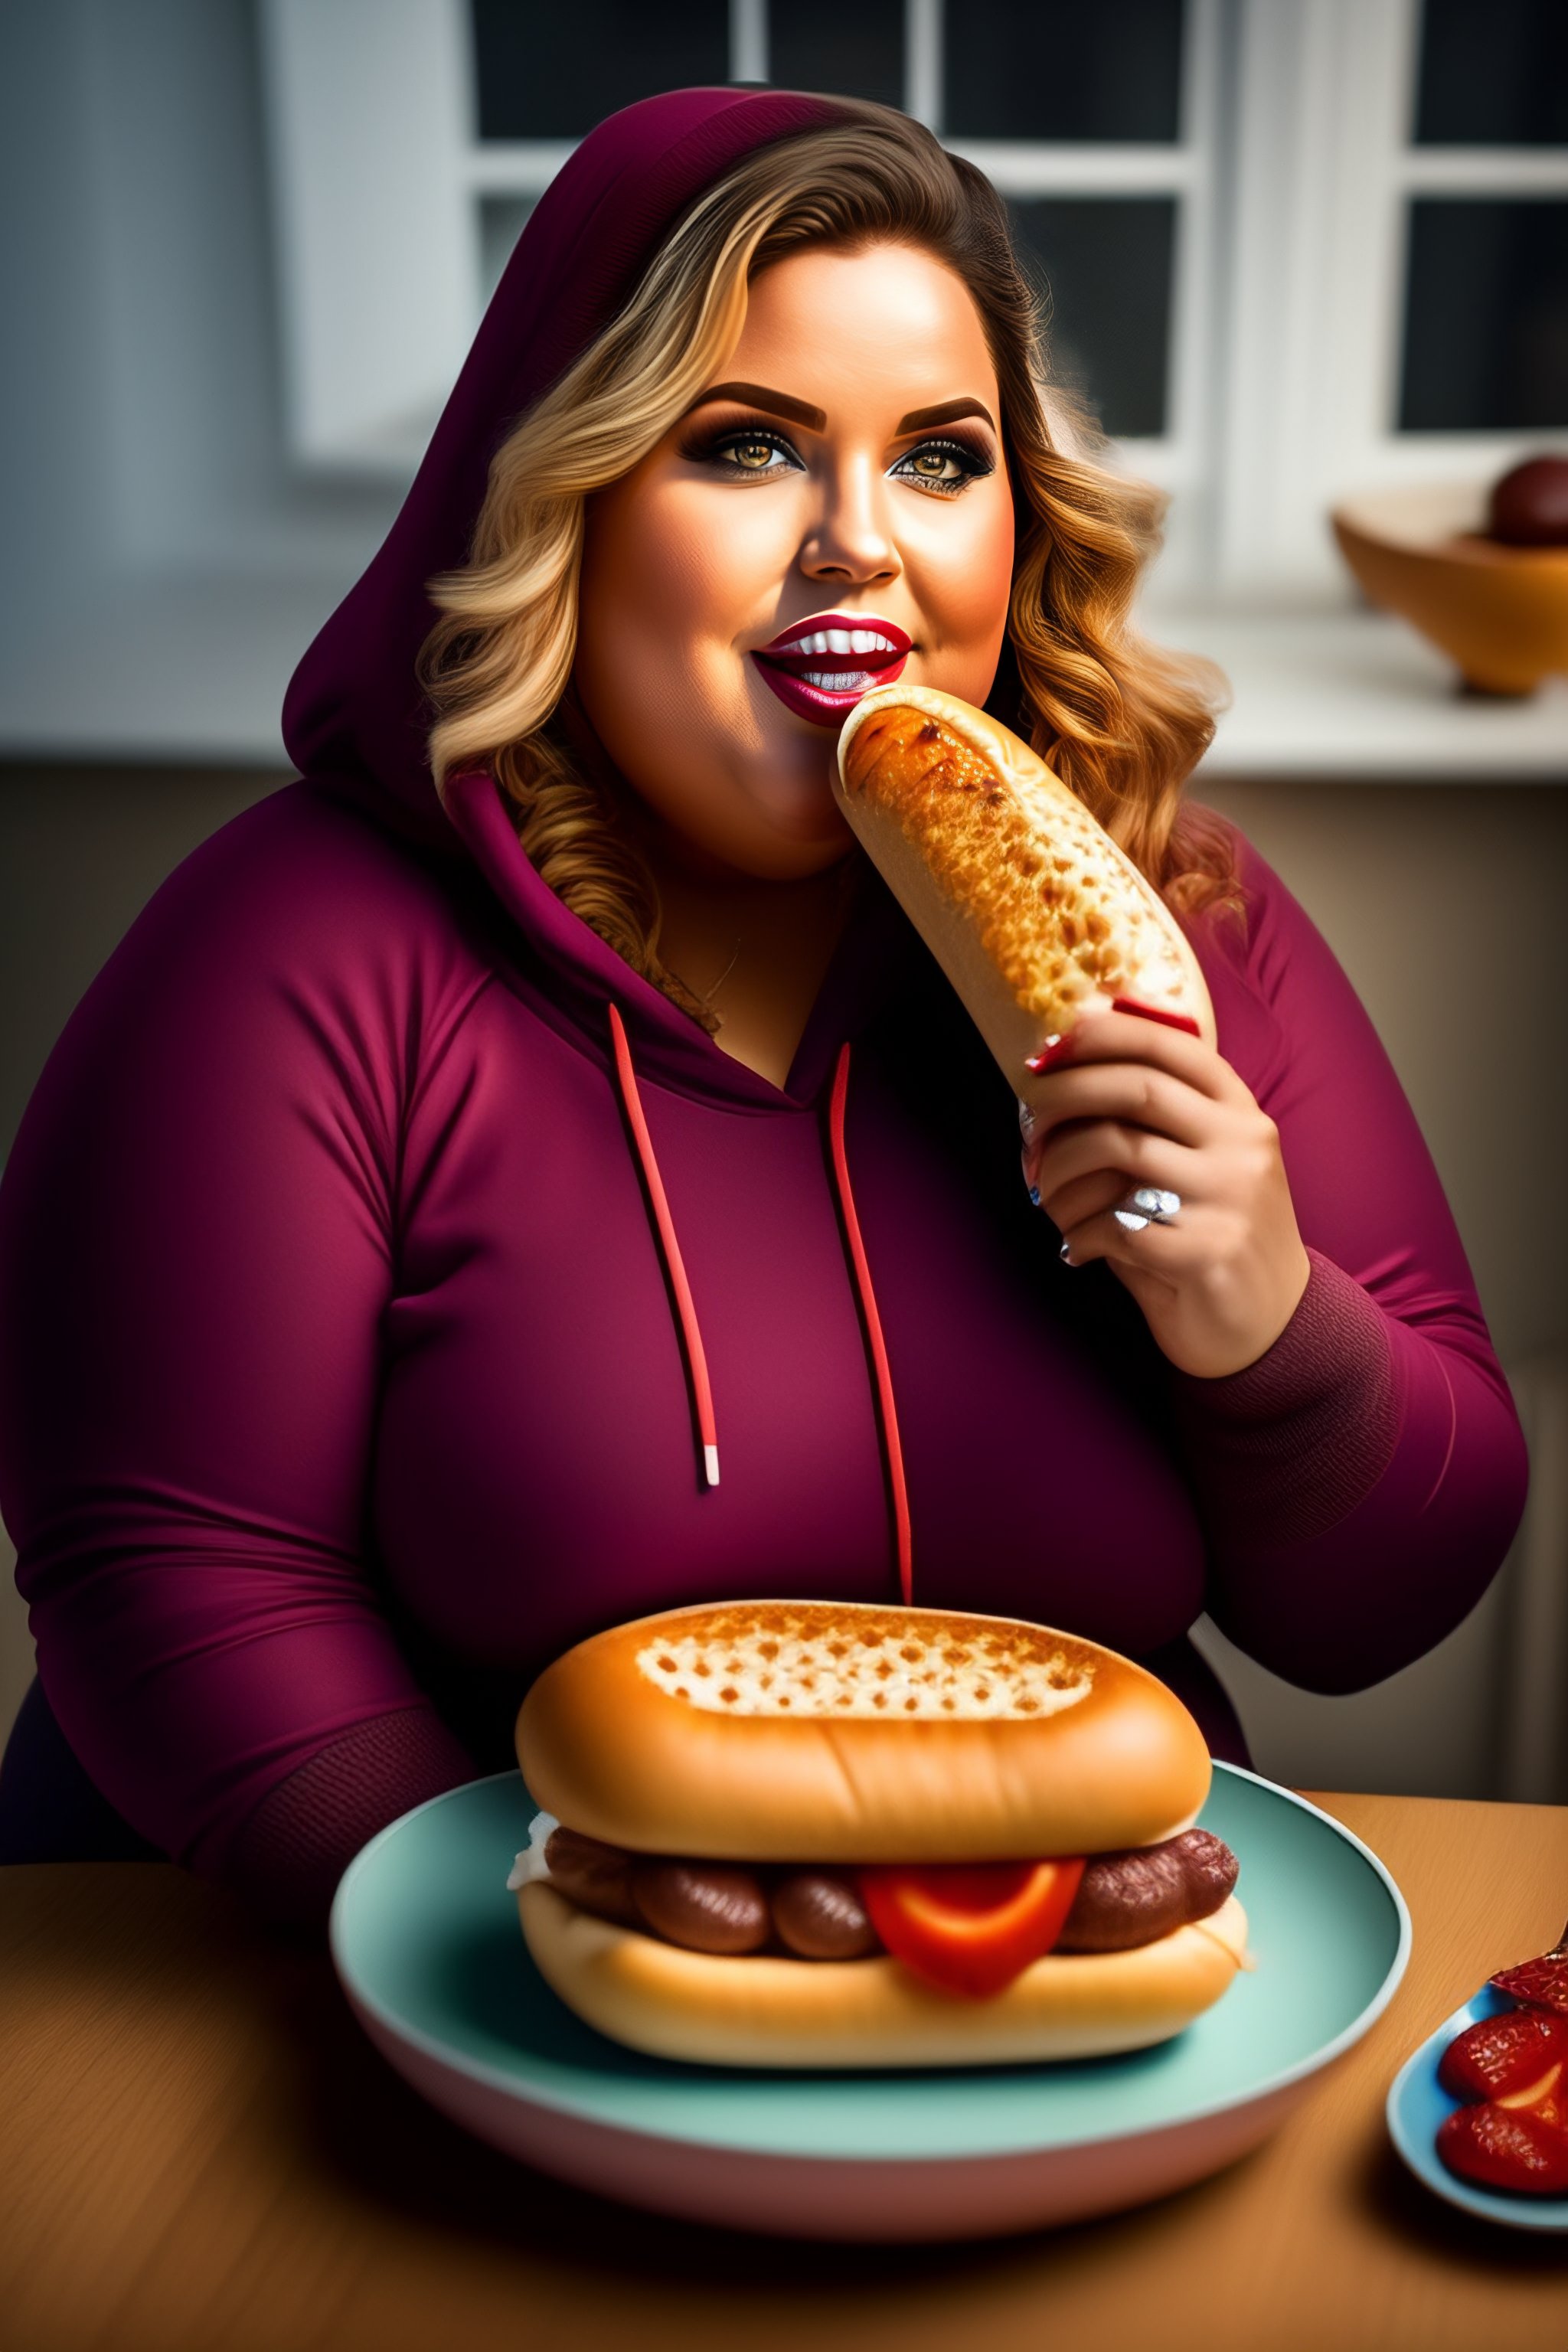 Lexica - Full-figured shapely Swedish woman wearing a tight and revealing  shirt, serving food